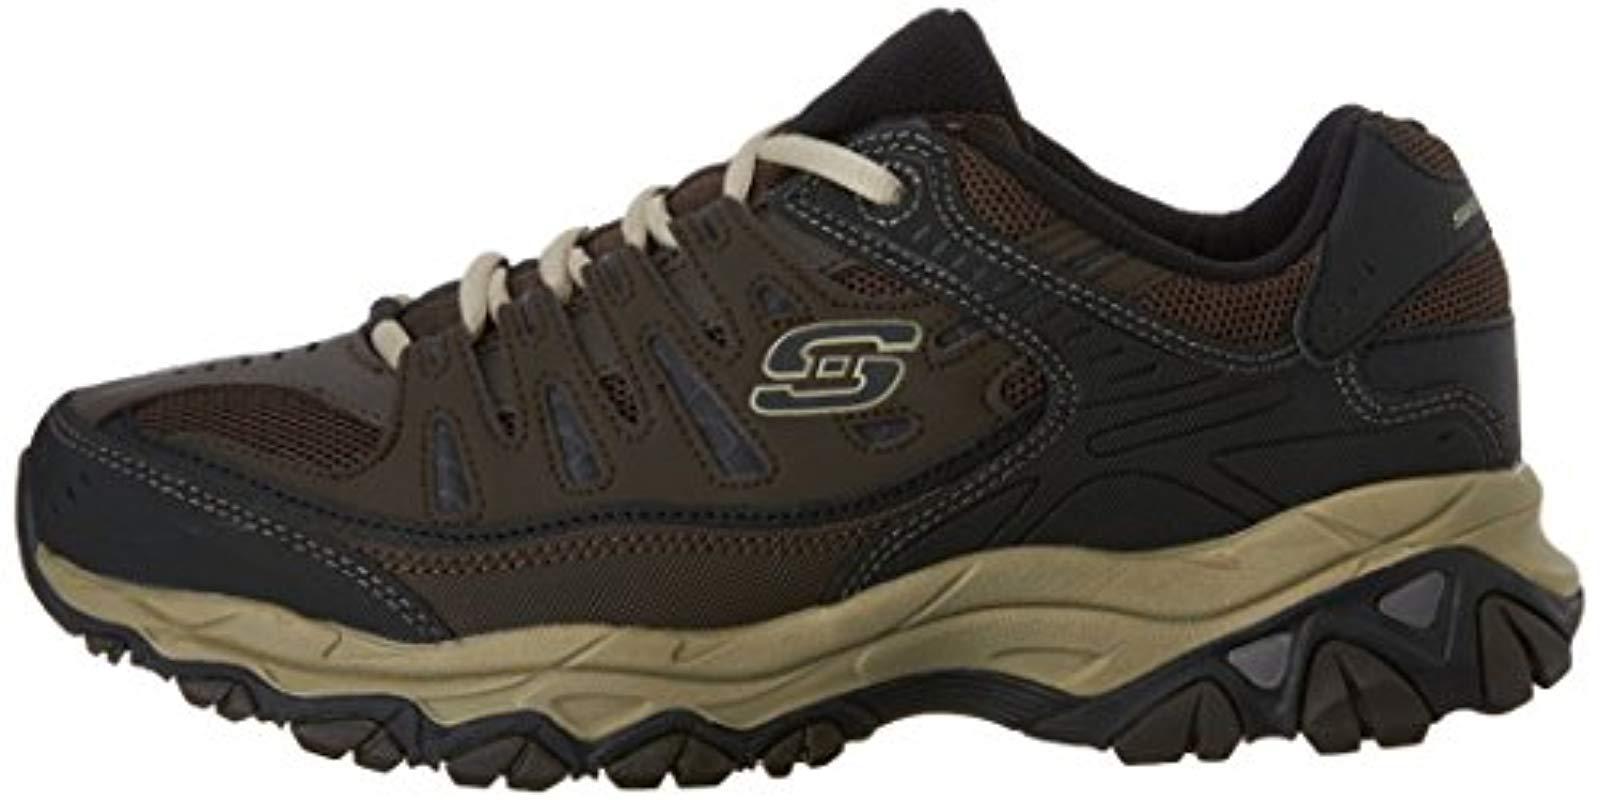 Skechers Leather Afterburn Memory-foam Lace-up Sneaker in Brown/Taupe ...